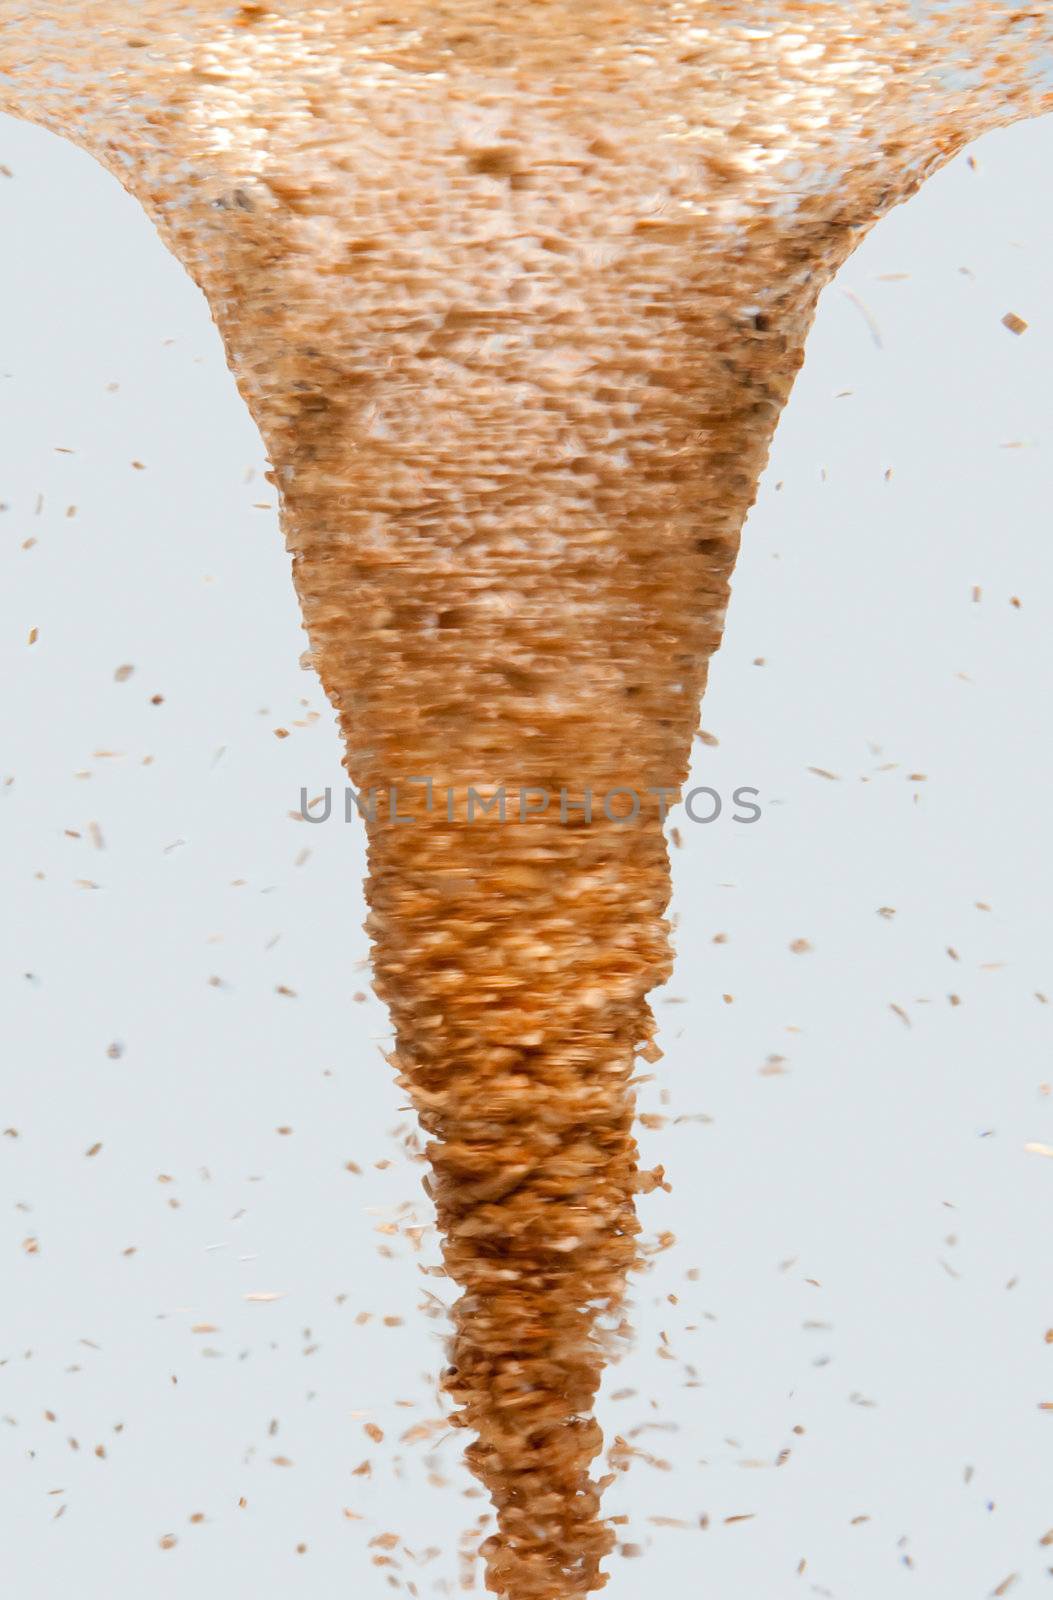 Side view of a tornado vortex swirl with wood chip debris, isolated